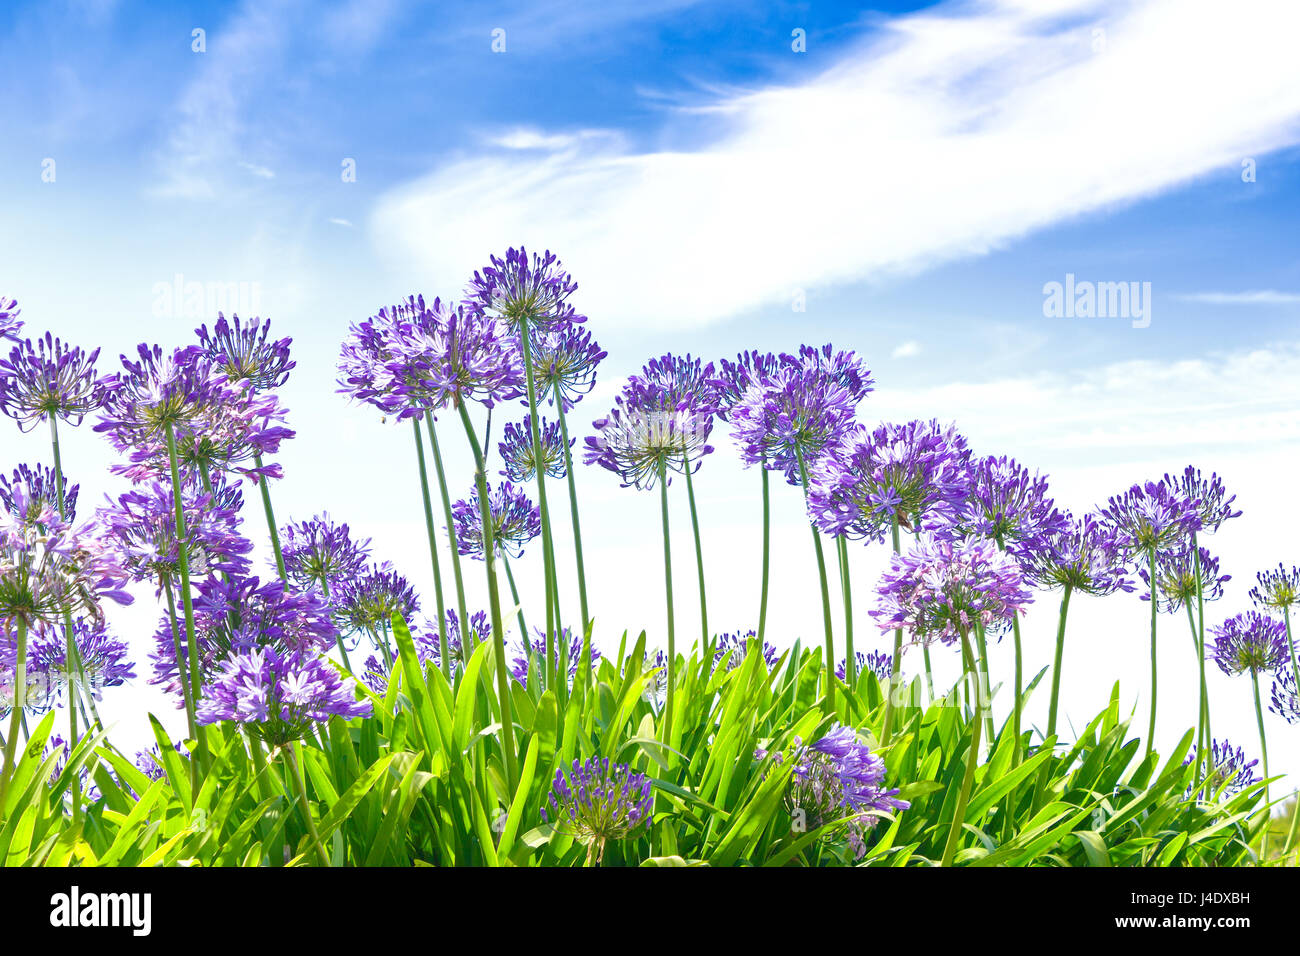 Purple-blue agapanthus flowers in full bloom on a sunny day against blue  sky, bright colors, copy or text space, summer gardening background concept  Stock Photo - Alamy